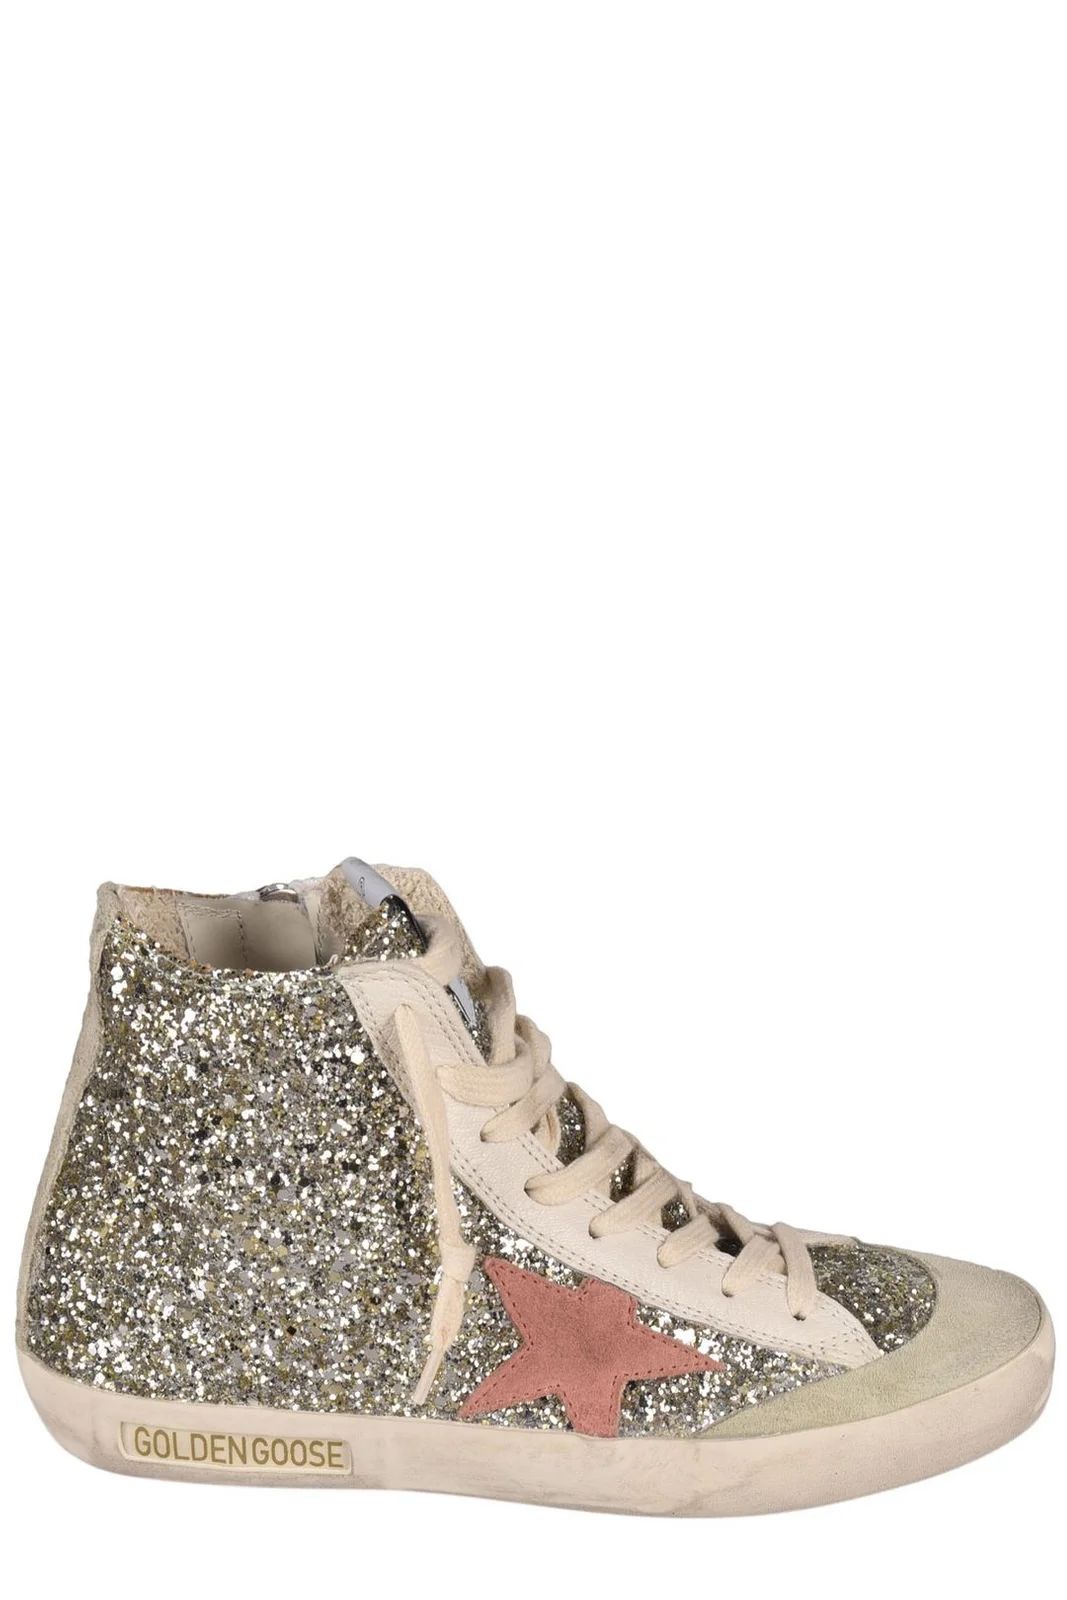 Golden Goose Deluxe Brand Francy Glitter Embellished High-Top Sneakers | Cettire Global